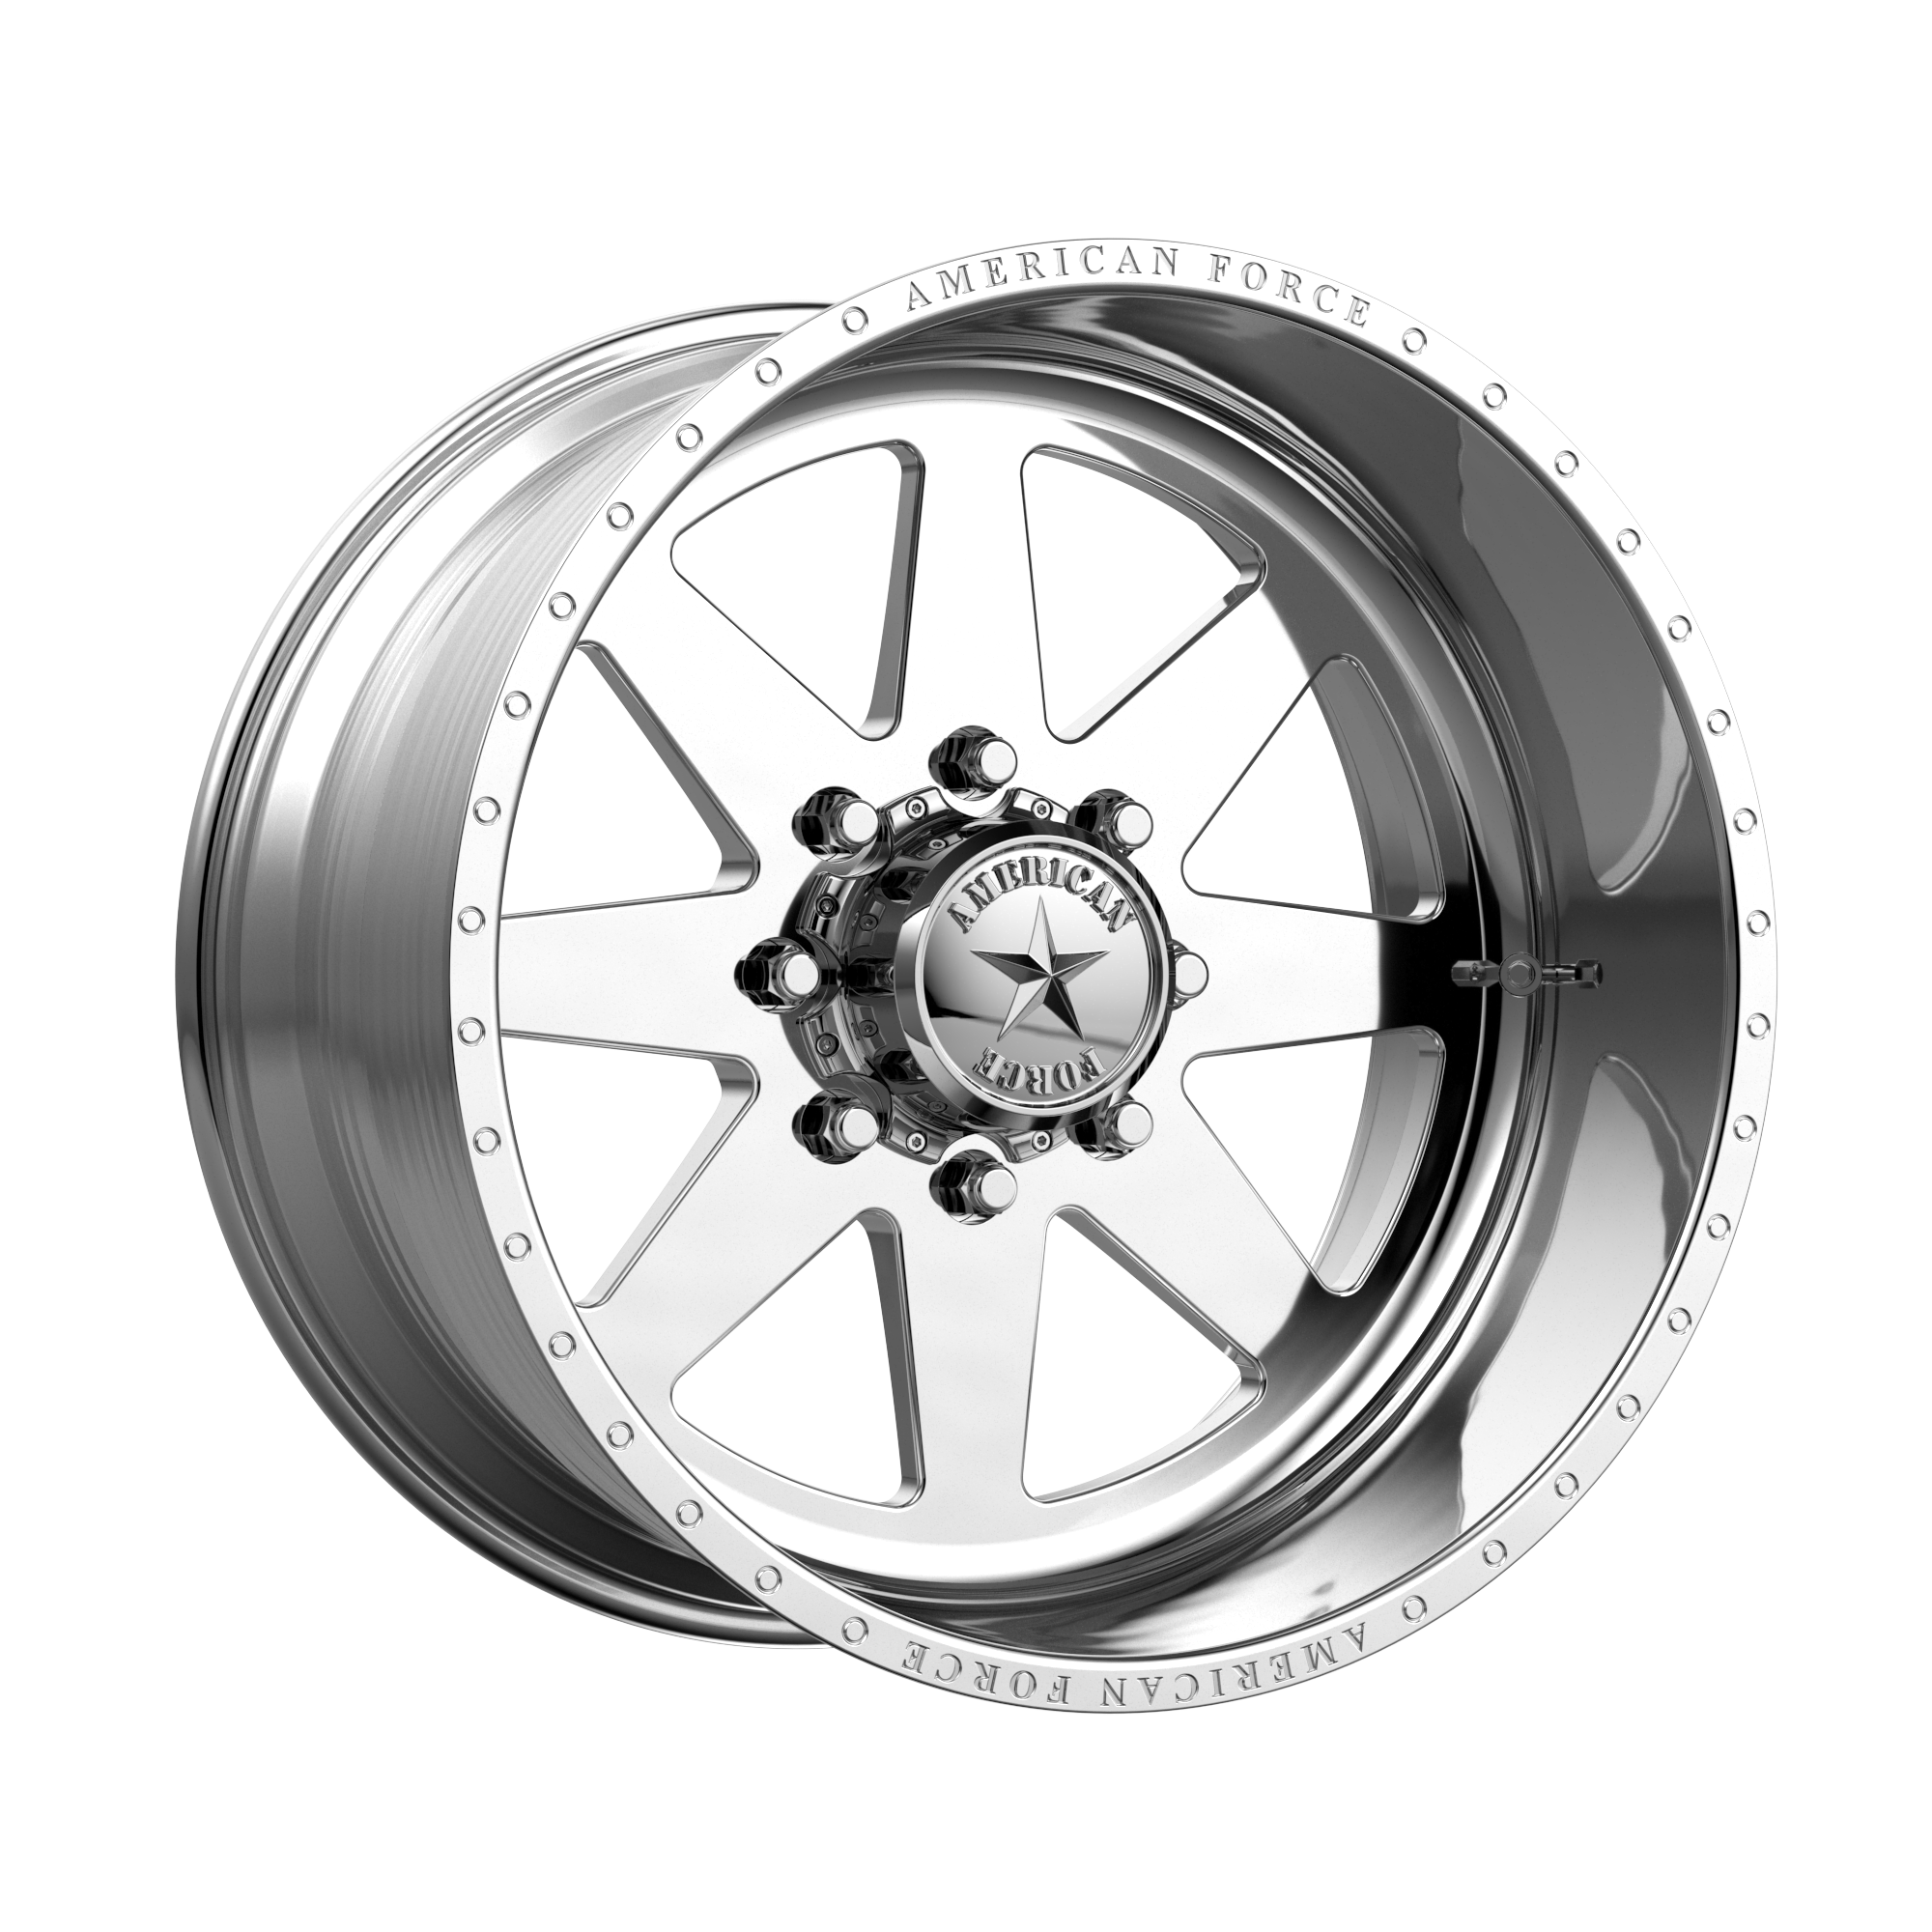 INDEPENDENCE SS 20x14 6x135.00 POLISHED (-73 mm) - Tires and Engine Performance